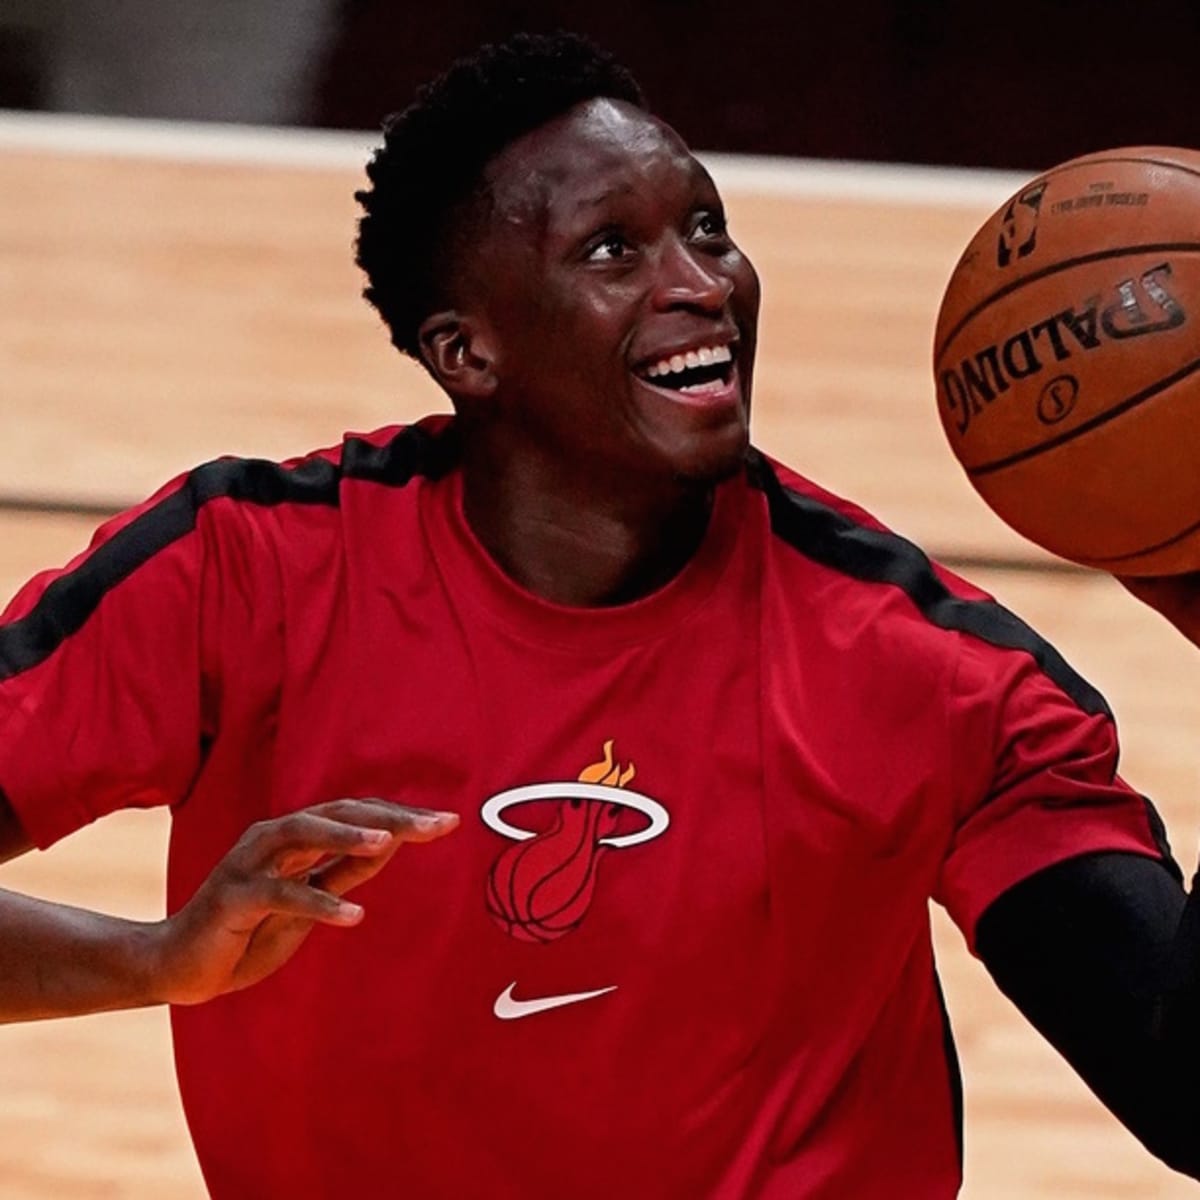 Victor Oladipo to return to Miami Heat on 1-year deal / News 